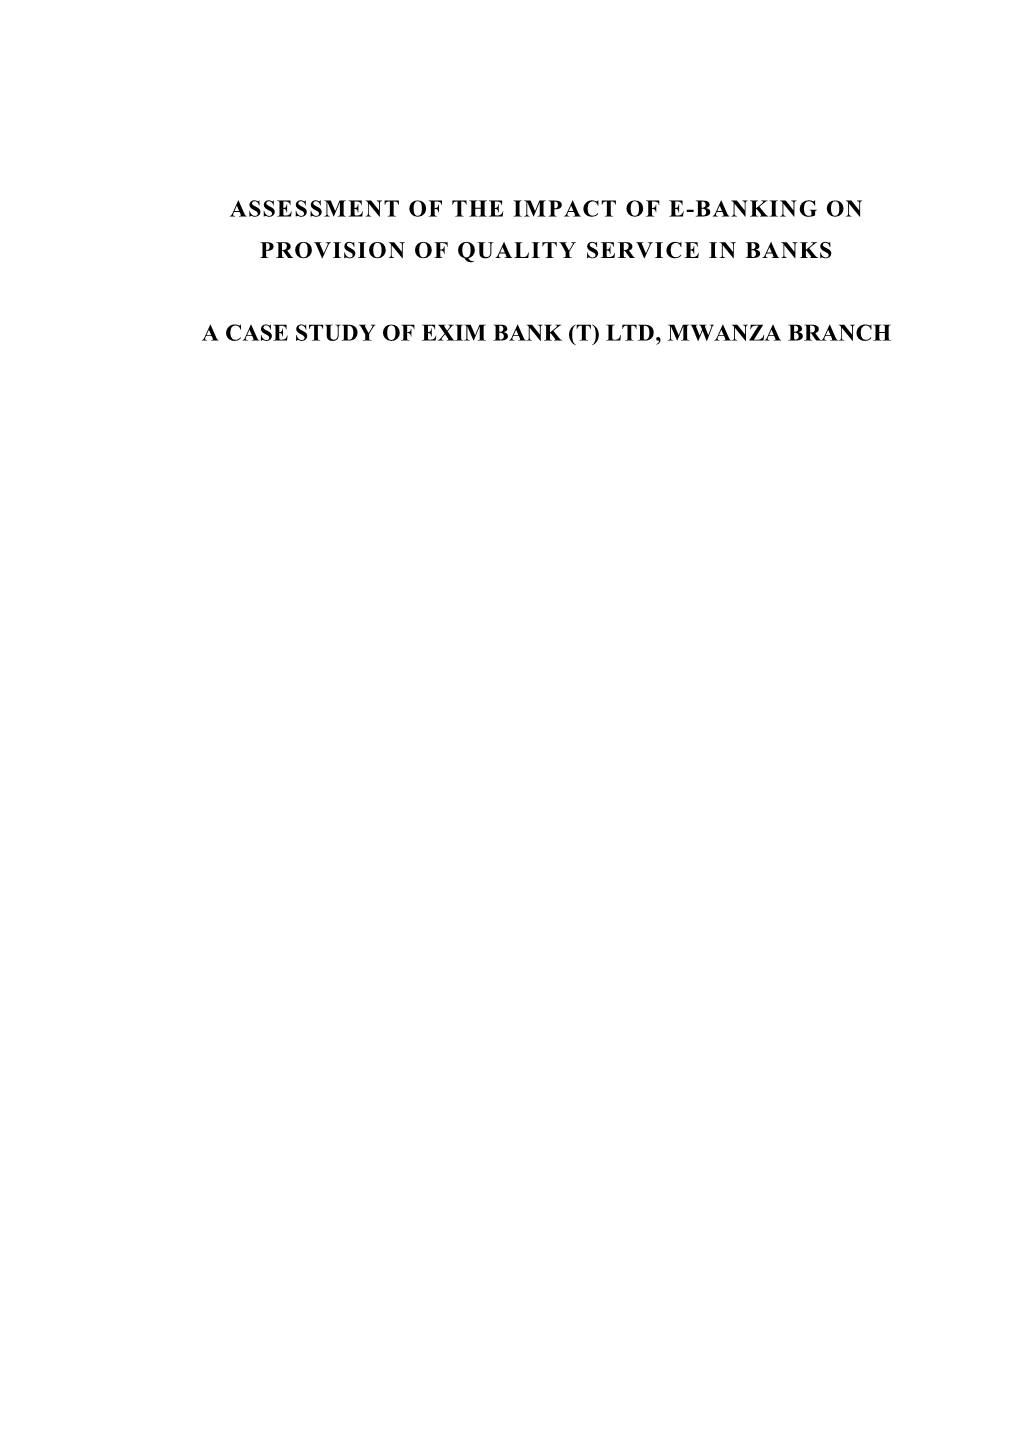 Assessment of the Impact of E-Banking on Provision of Quality Service in Banks